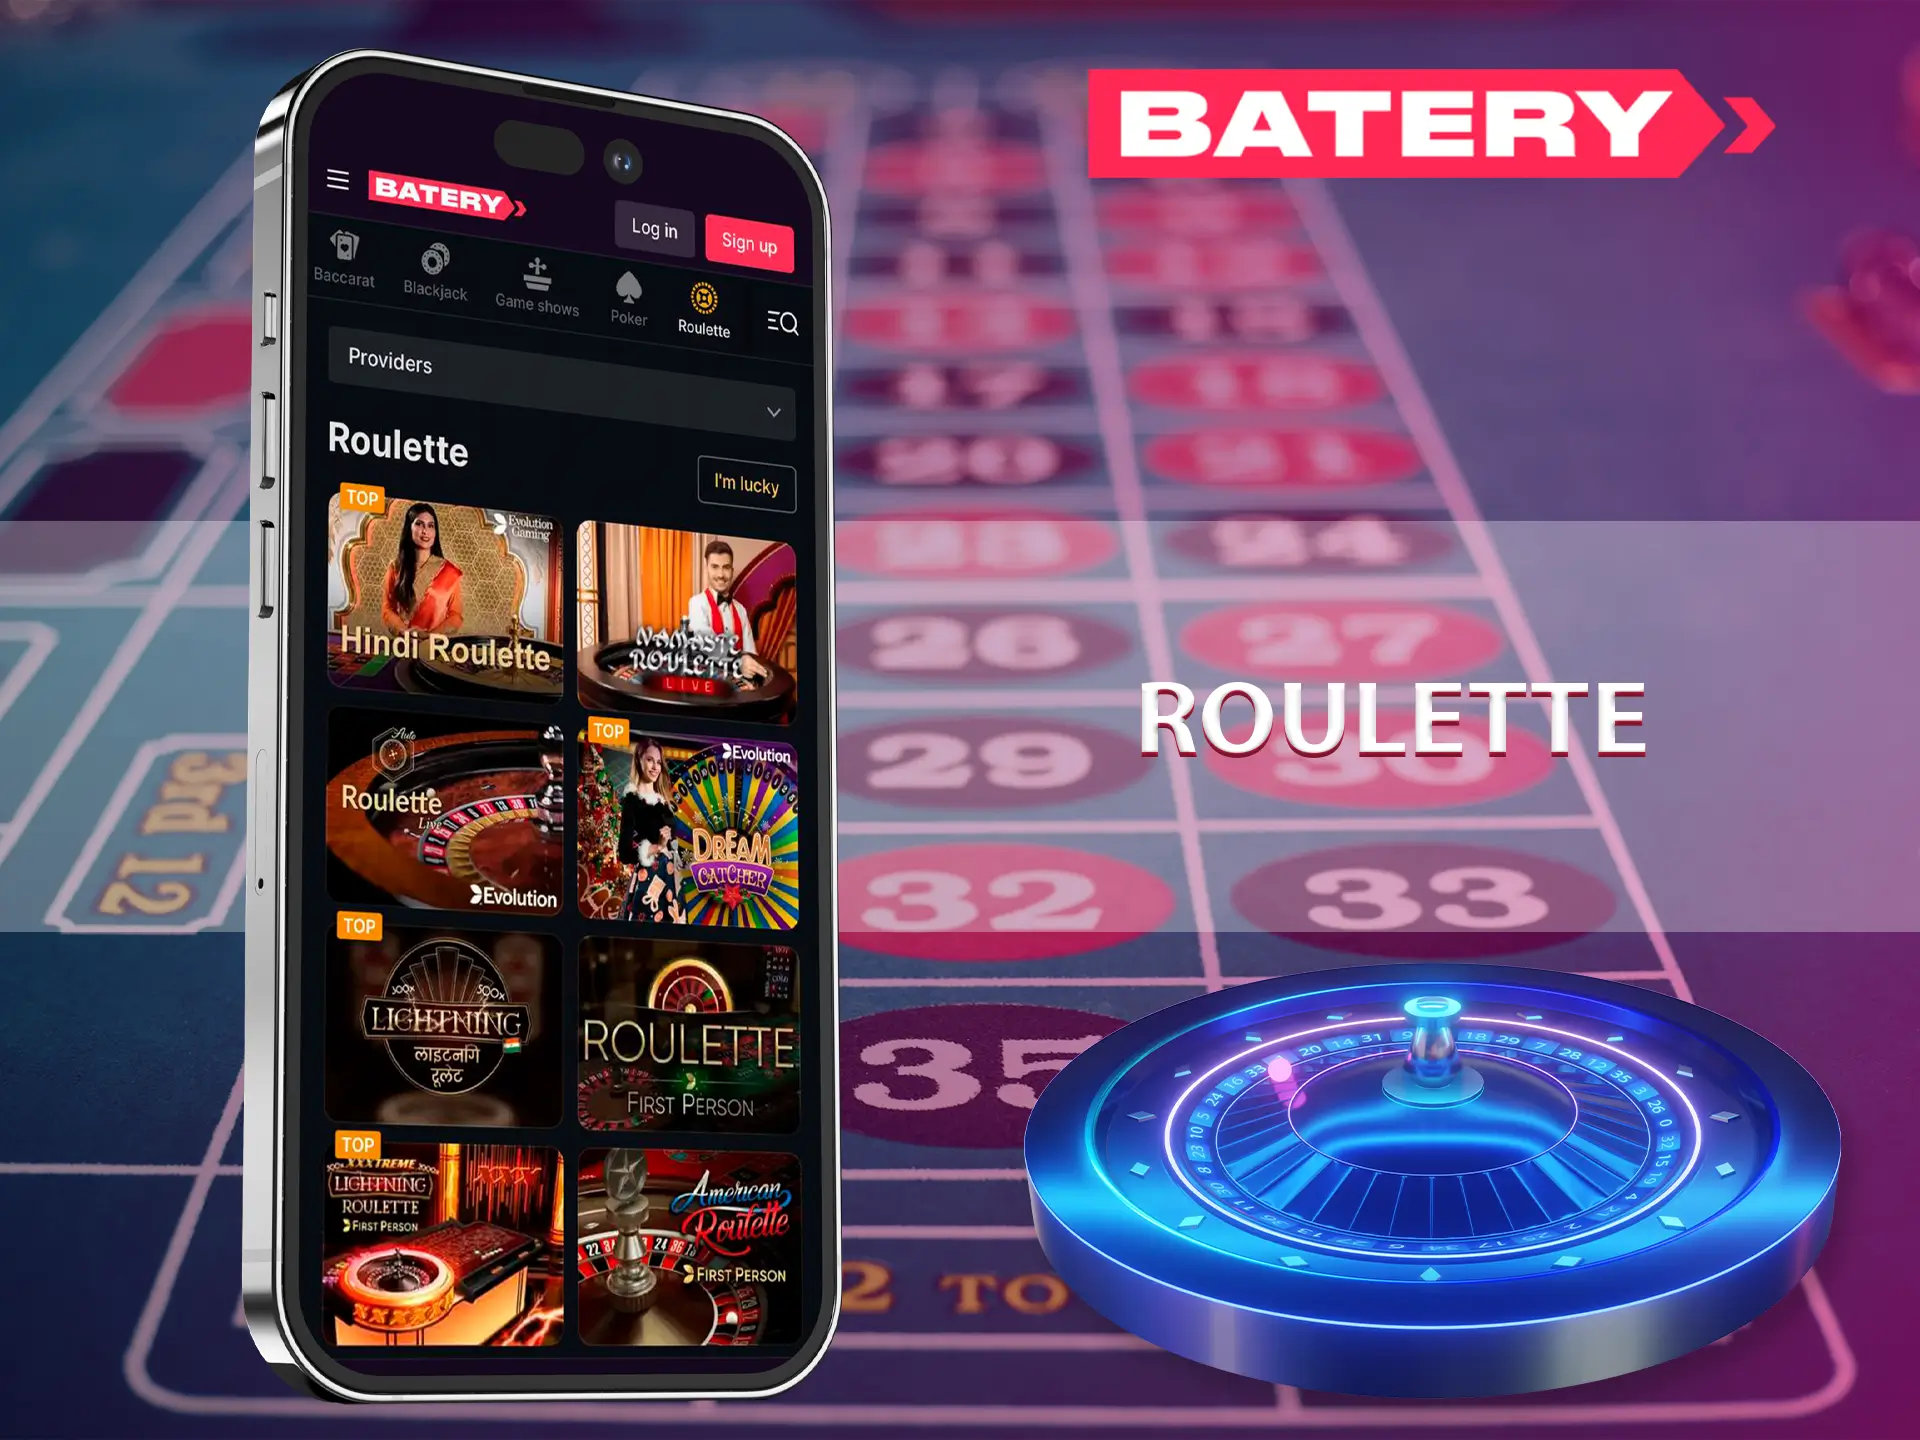 Play roulette and win big cash prizes.